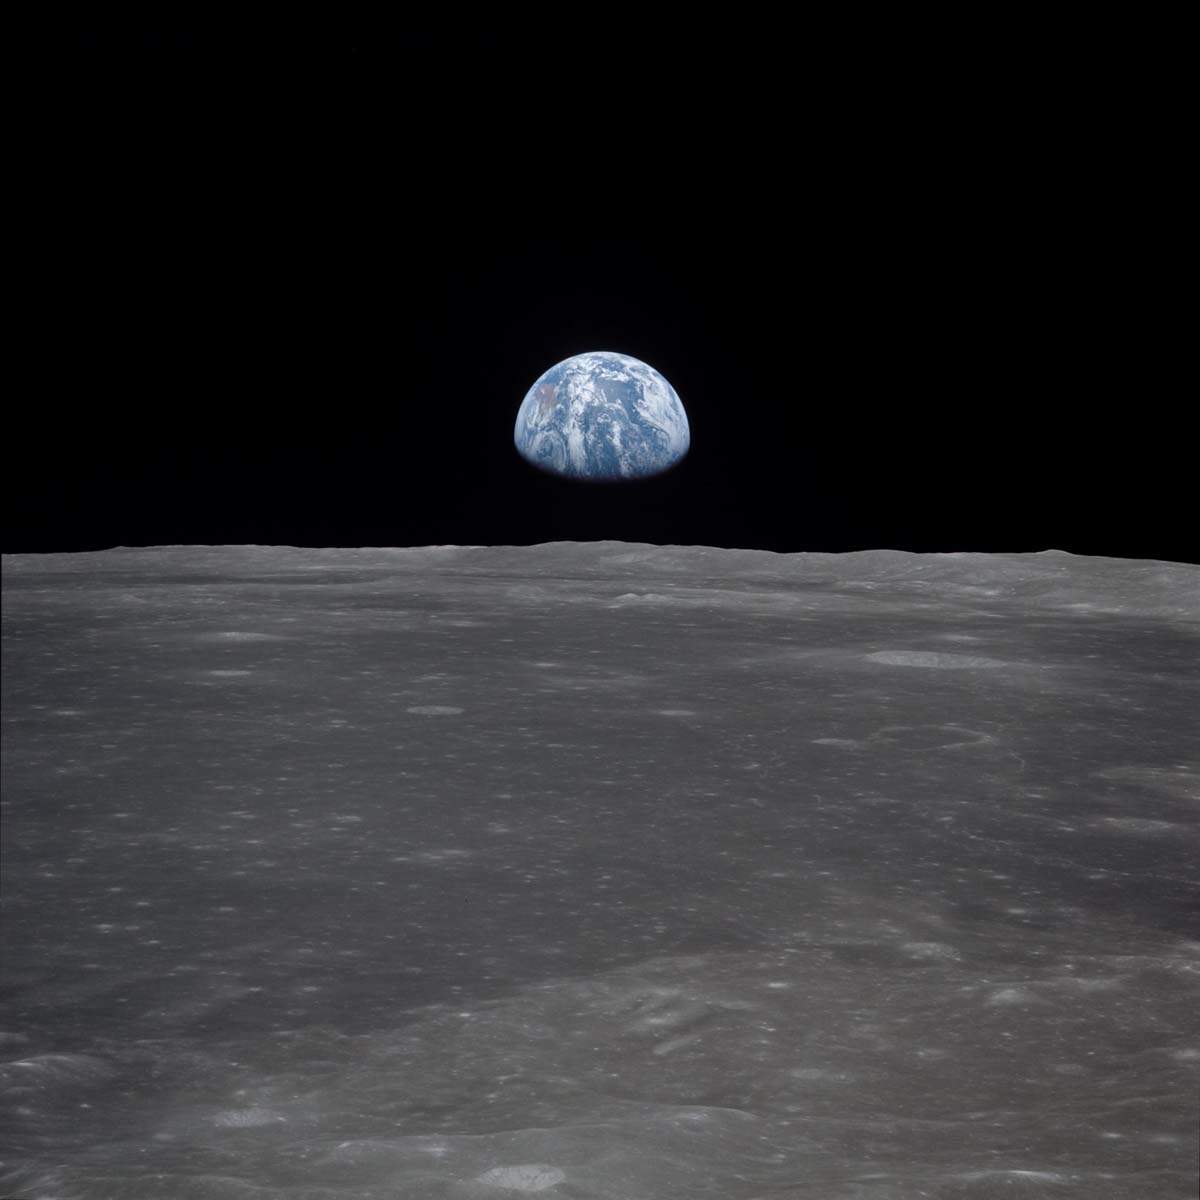 Second man to step foot on moon Buzz Aldrin shares stunning picture of earth 50 years later